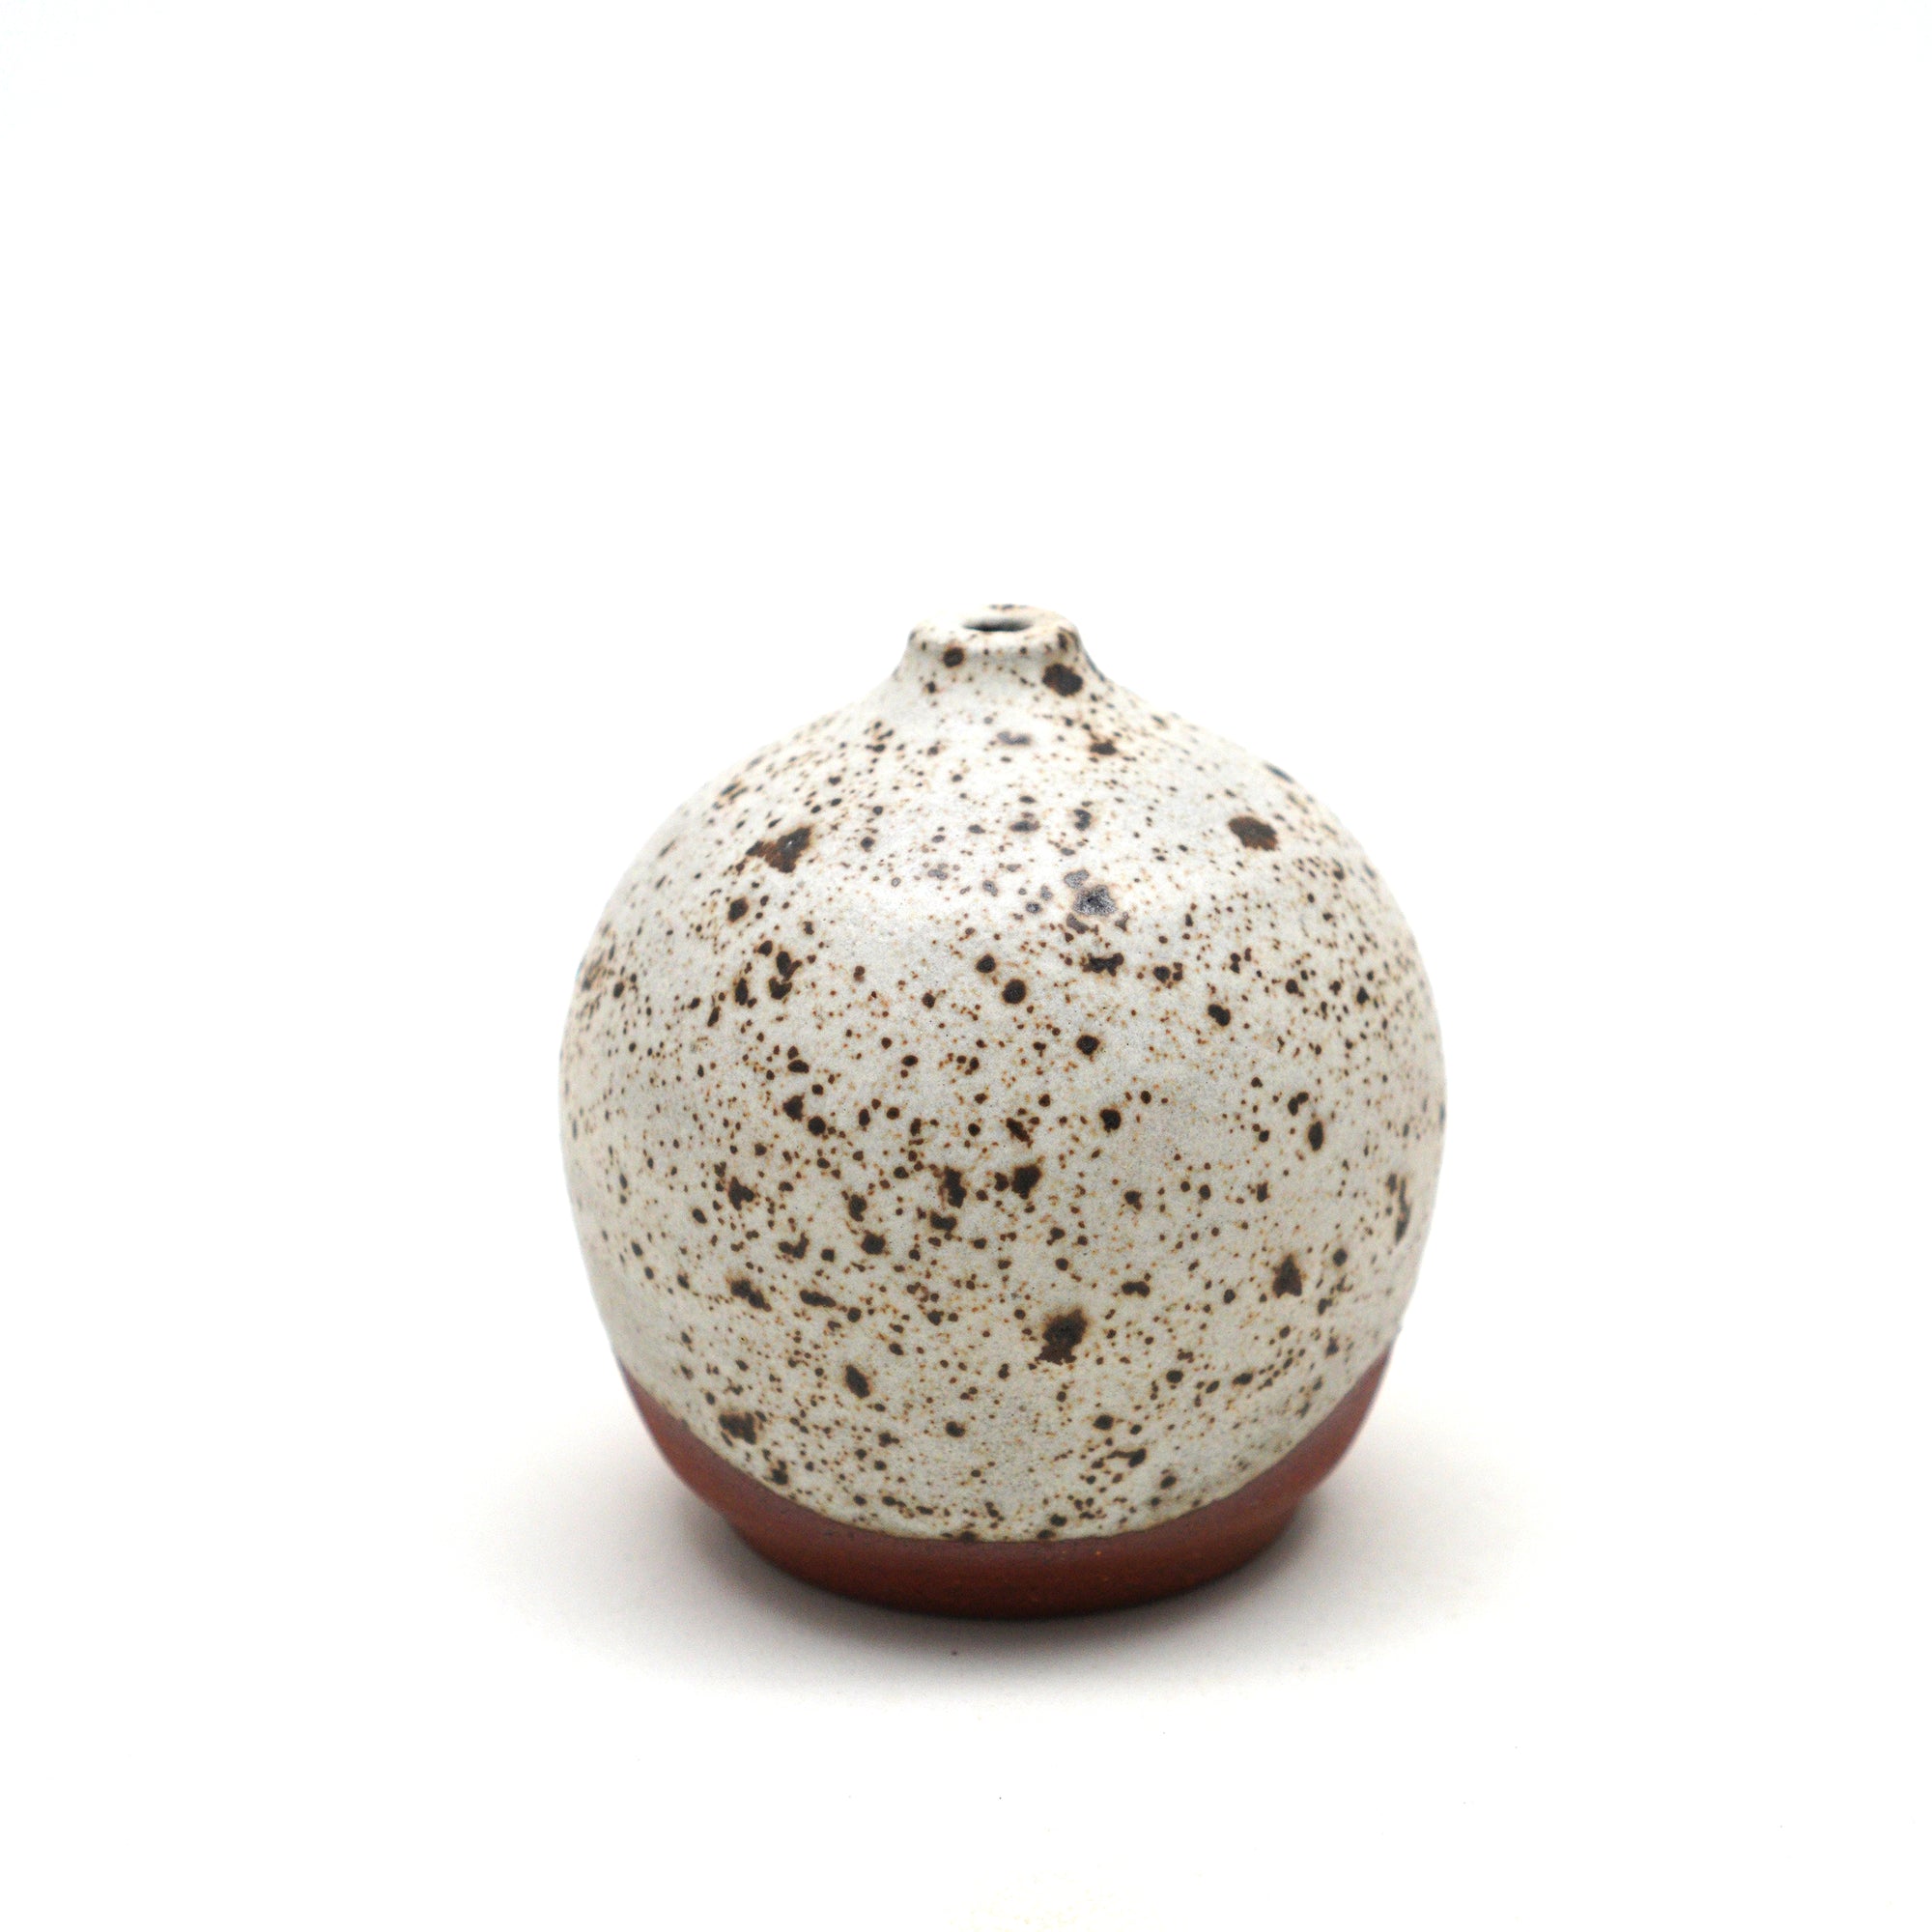 Mini ceramic vase with red clay with a white speckled matte glaze. Made by Living Large Small on San Juan Island, WA